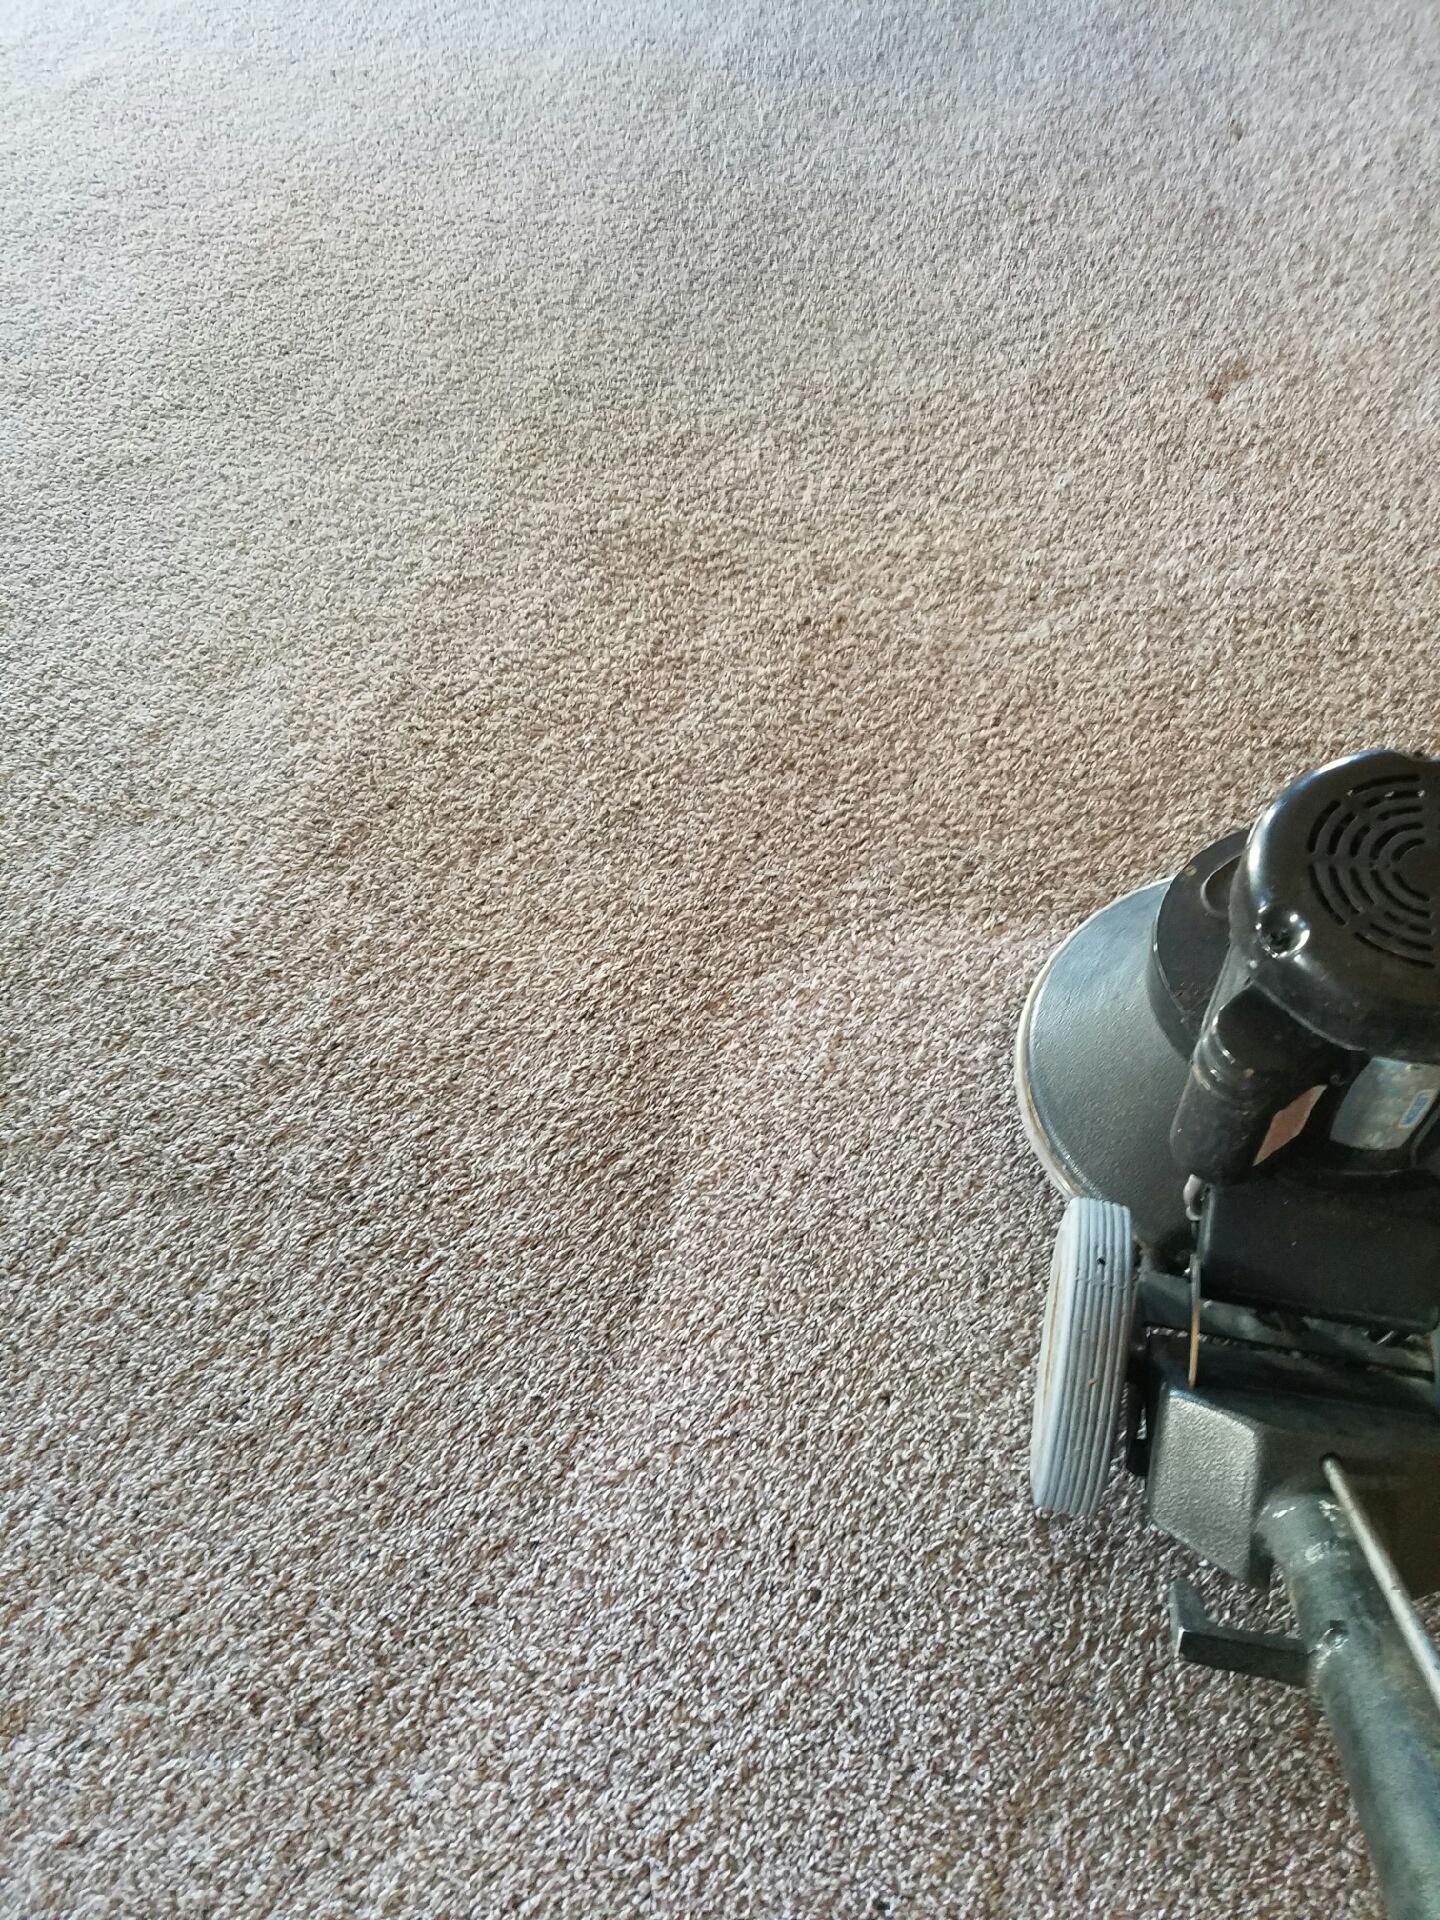 Joe's Carpet Cleaning and Moving